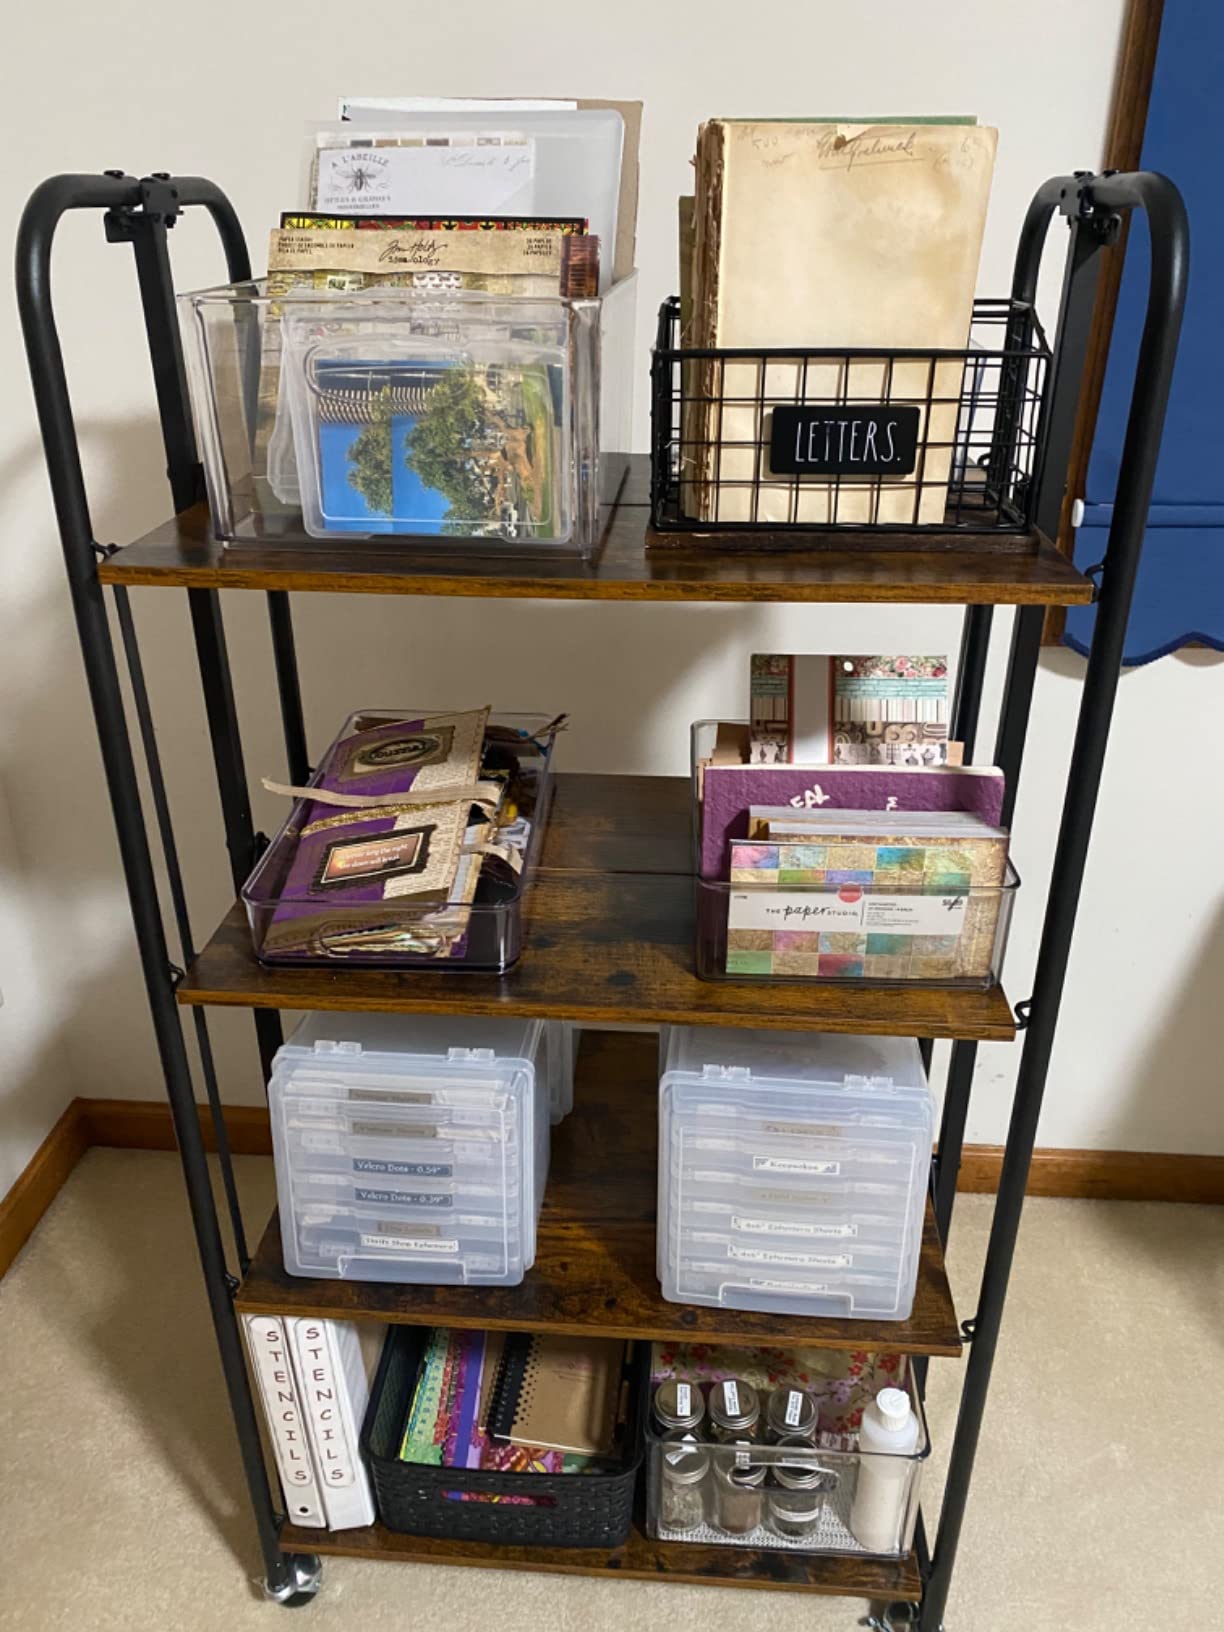 Good sturdy storage, easy to move, wide enough between shelves for my taller craft supplies